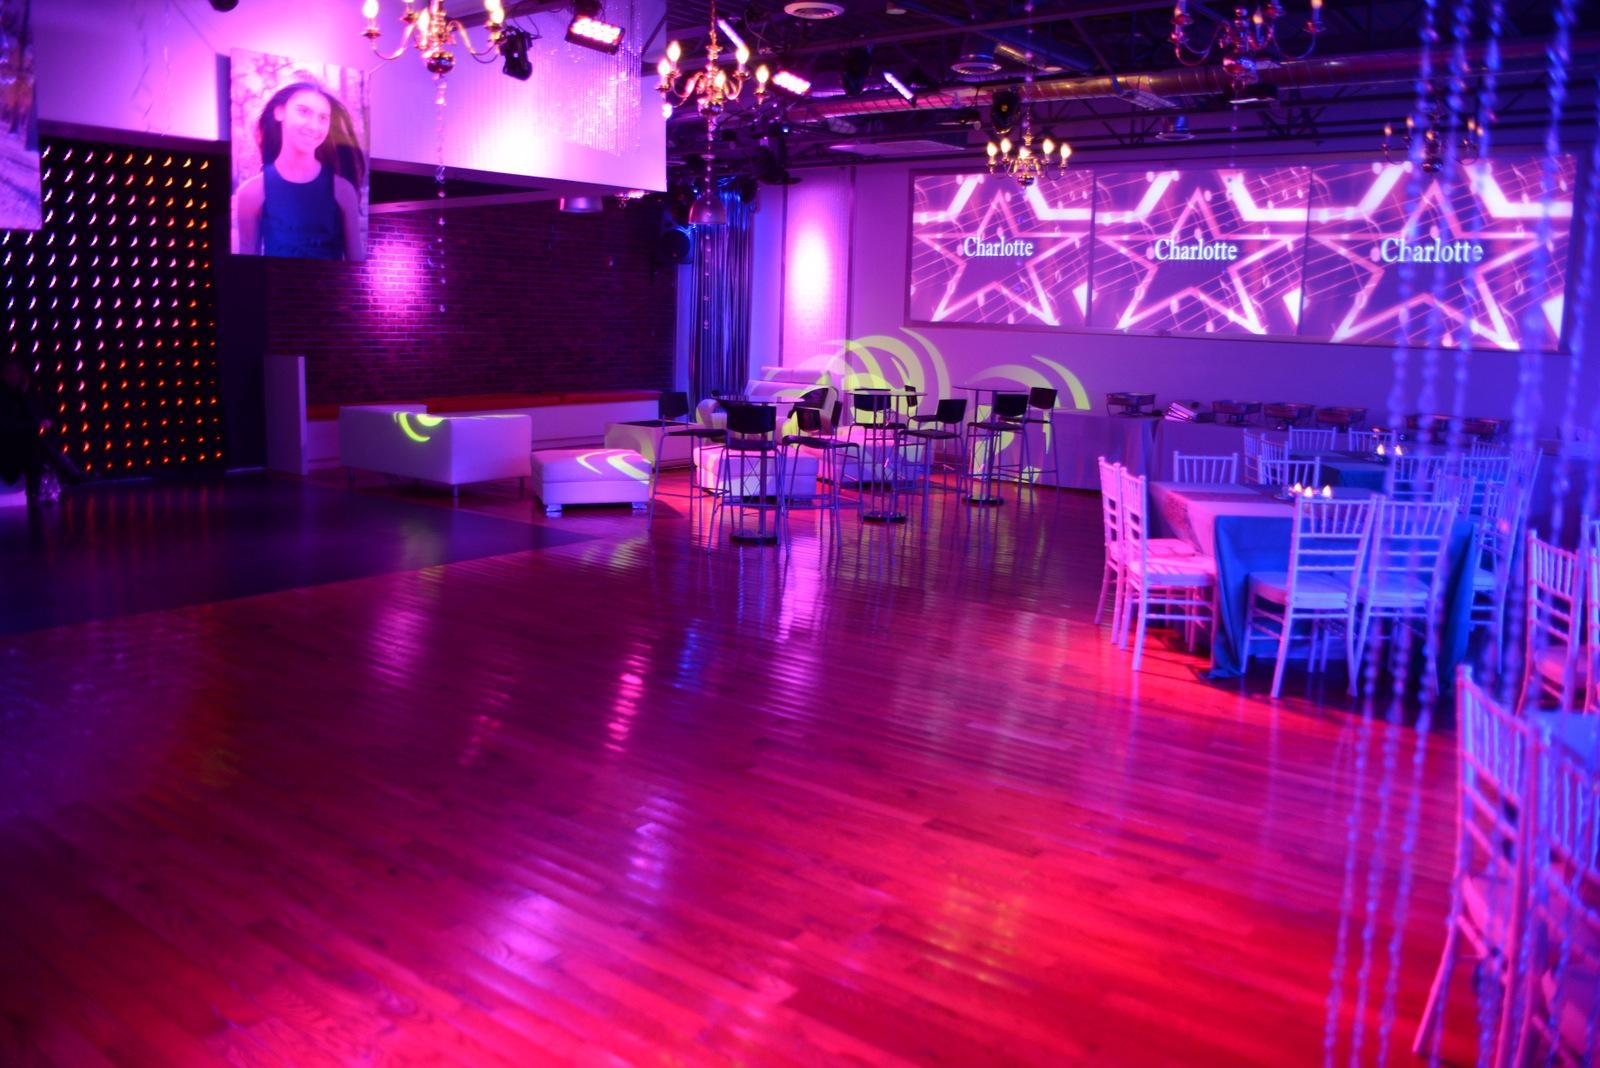 Rain On Water Event Space-state of the art entertainment venue located in Teaneck NJ. Provides a seasoned party planner to customize your party or corporate event. 6,500 square feet space in newly renovated indoor are and 4,000 square feet outdoor patio.